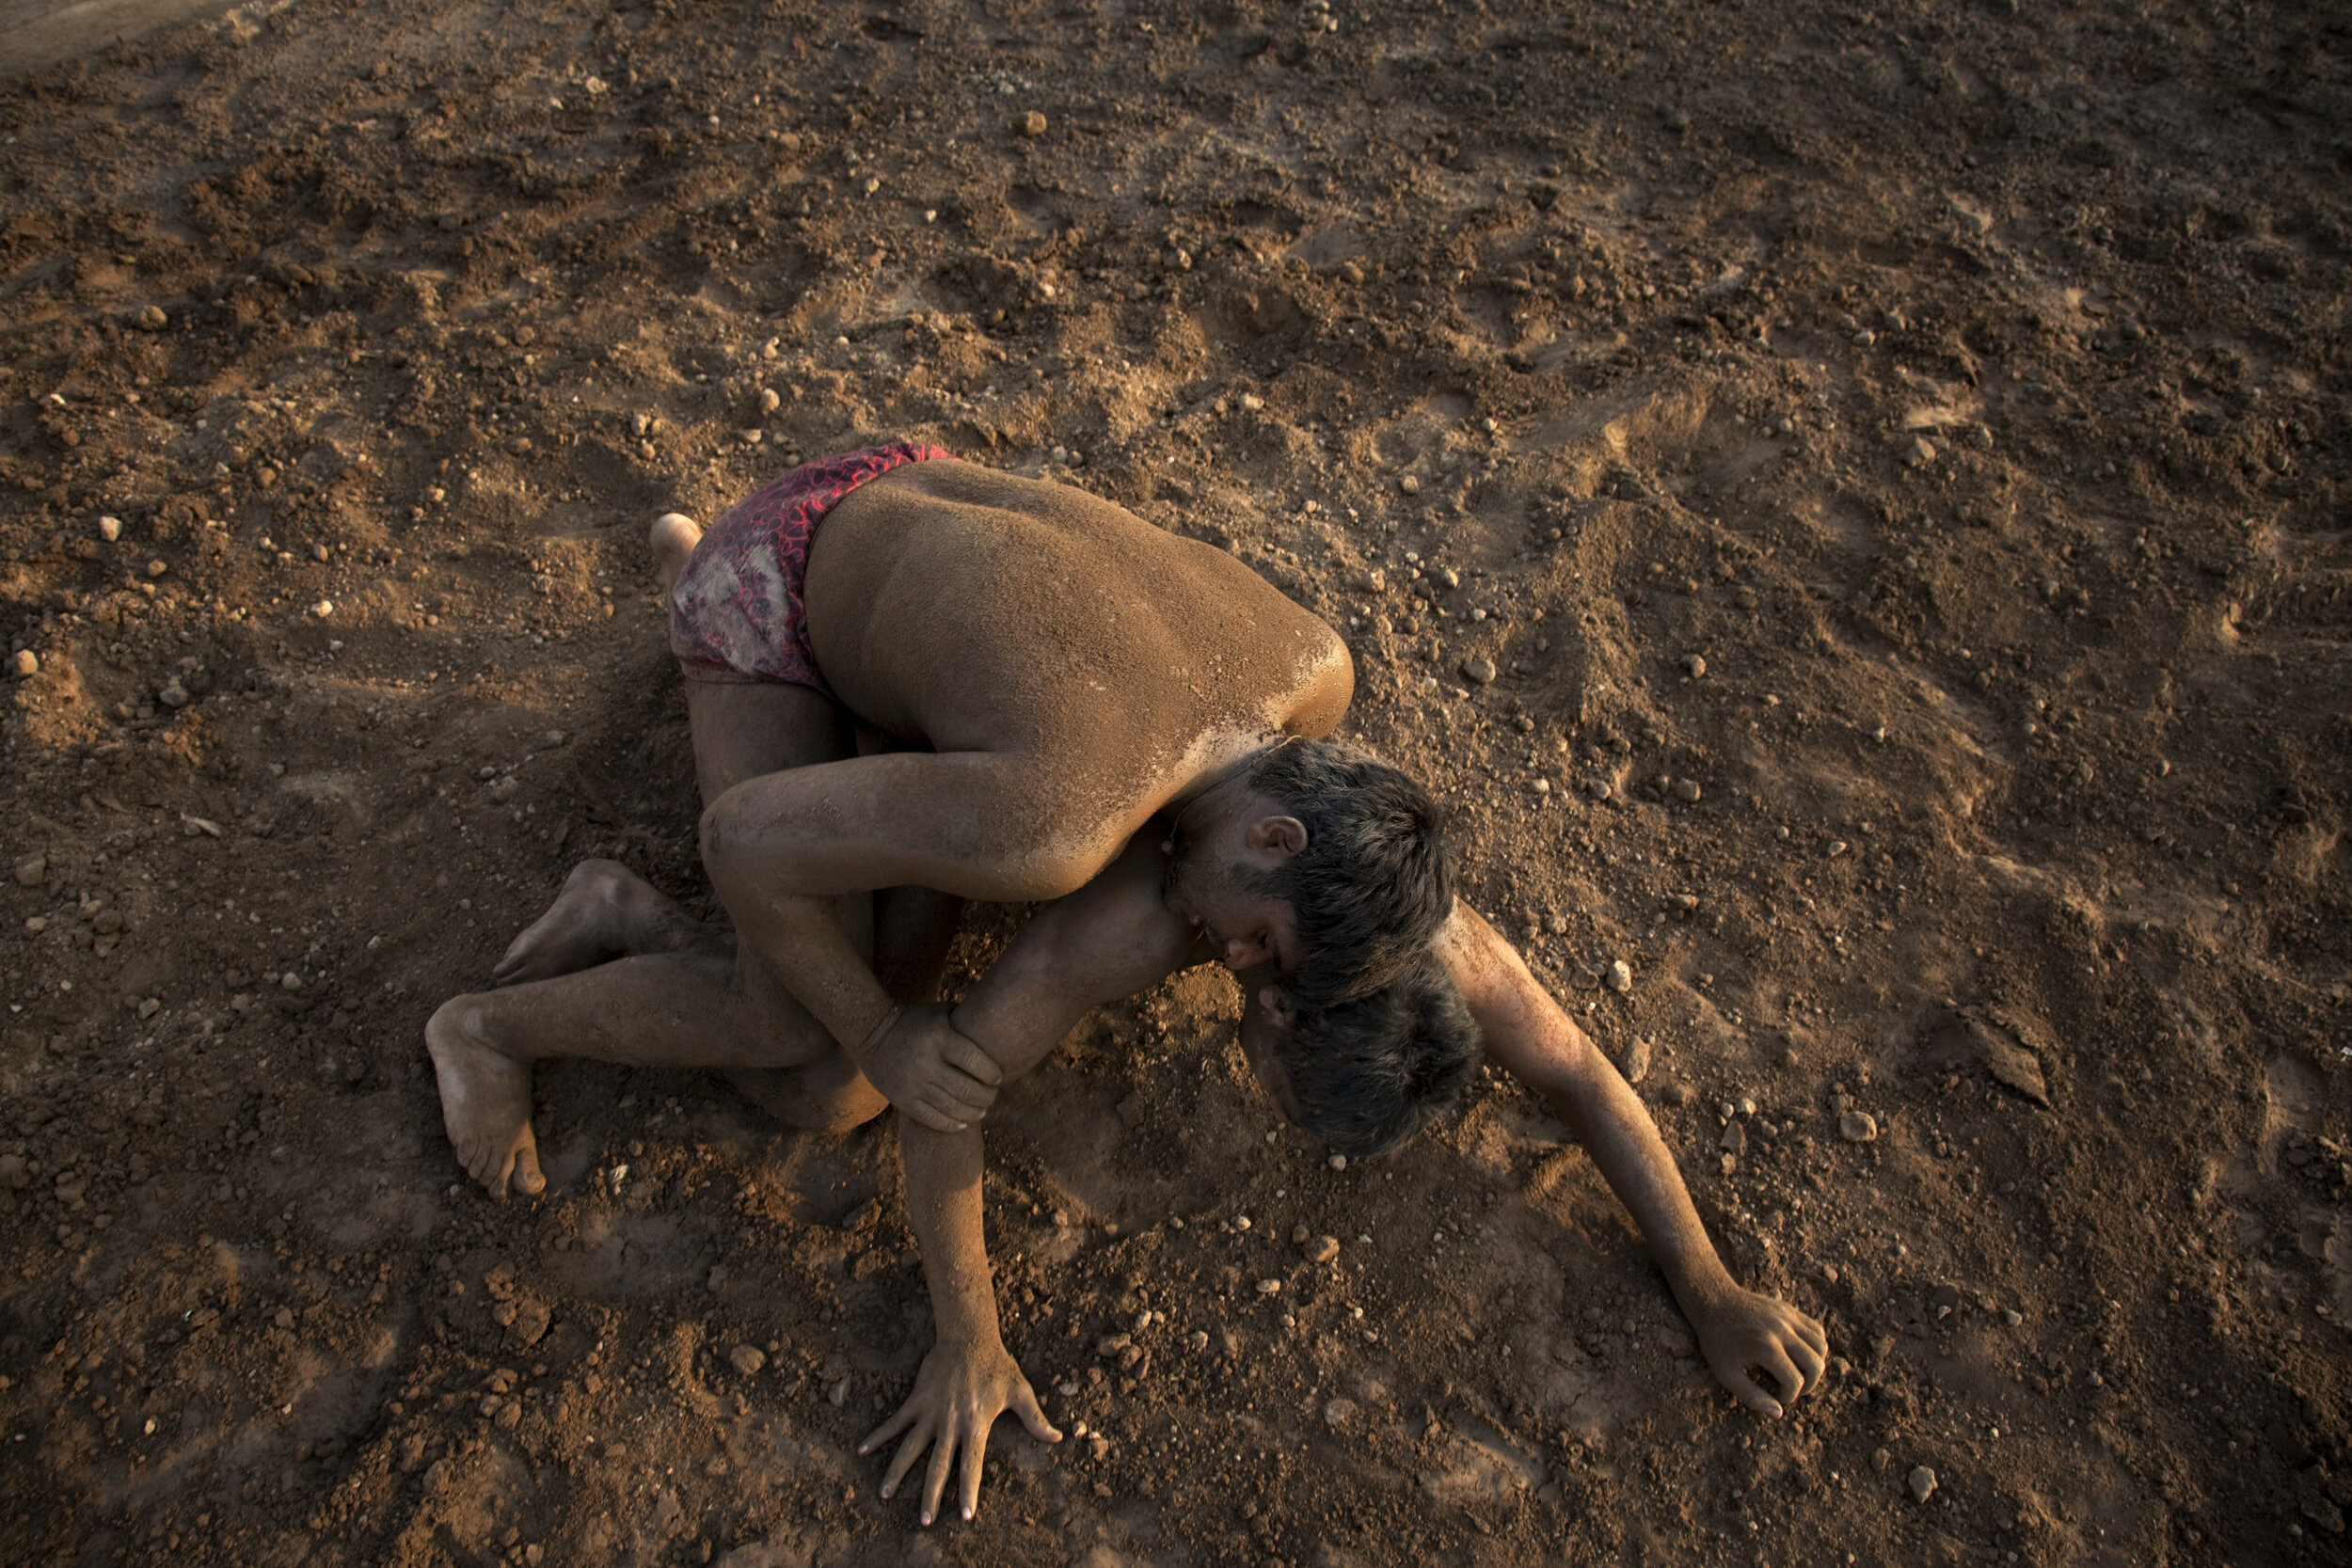  Combatants grapple in the dirt during Kushti, or Pehlwani, a martial art and style of wrestling popular in India, Pakistan, and Bangladesh. Punjab, Pakistan. 2009 